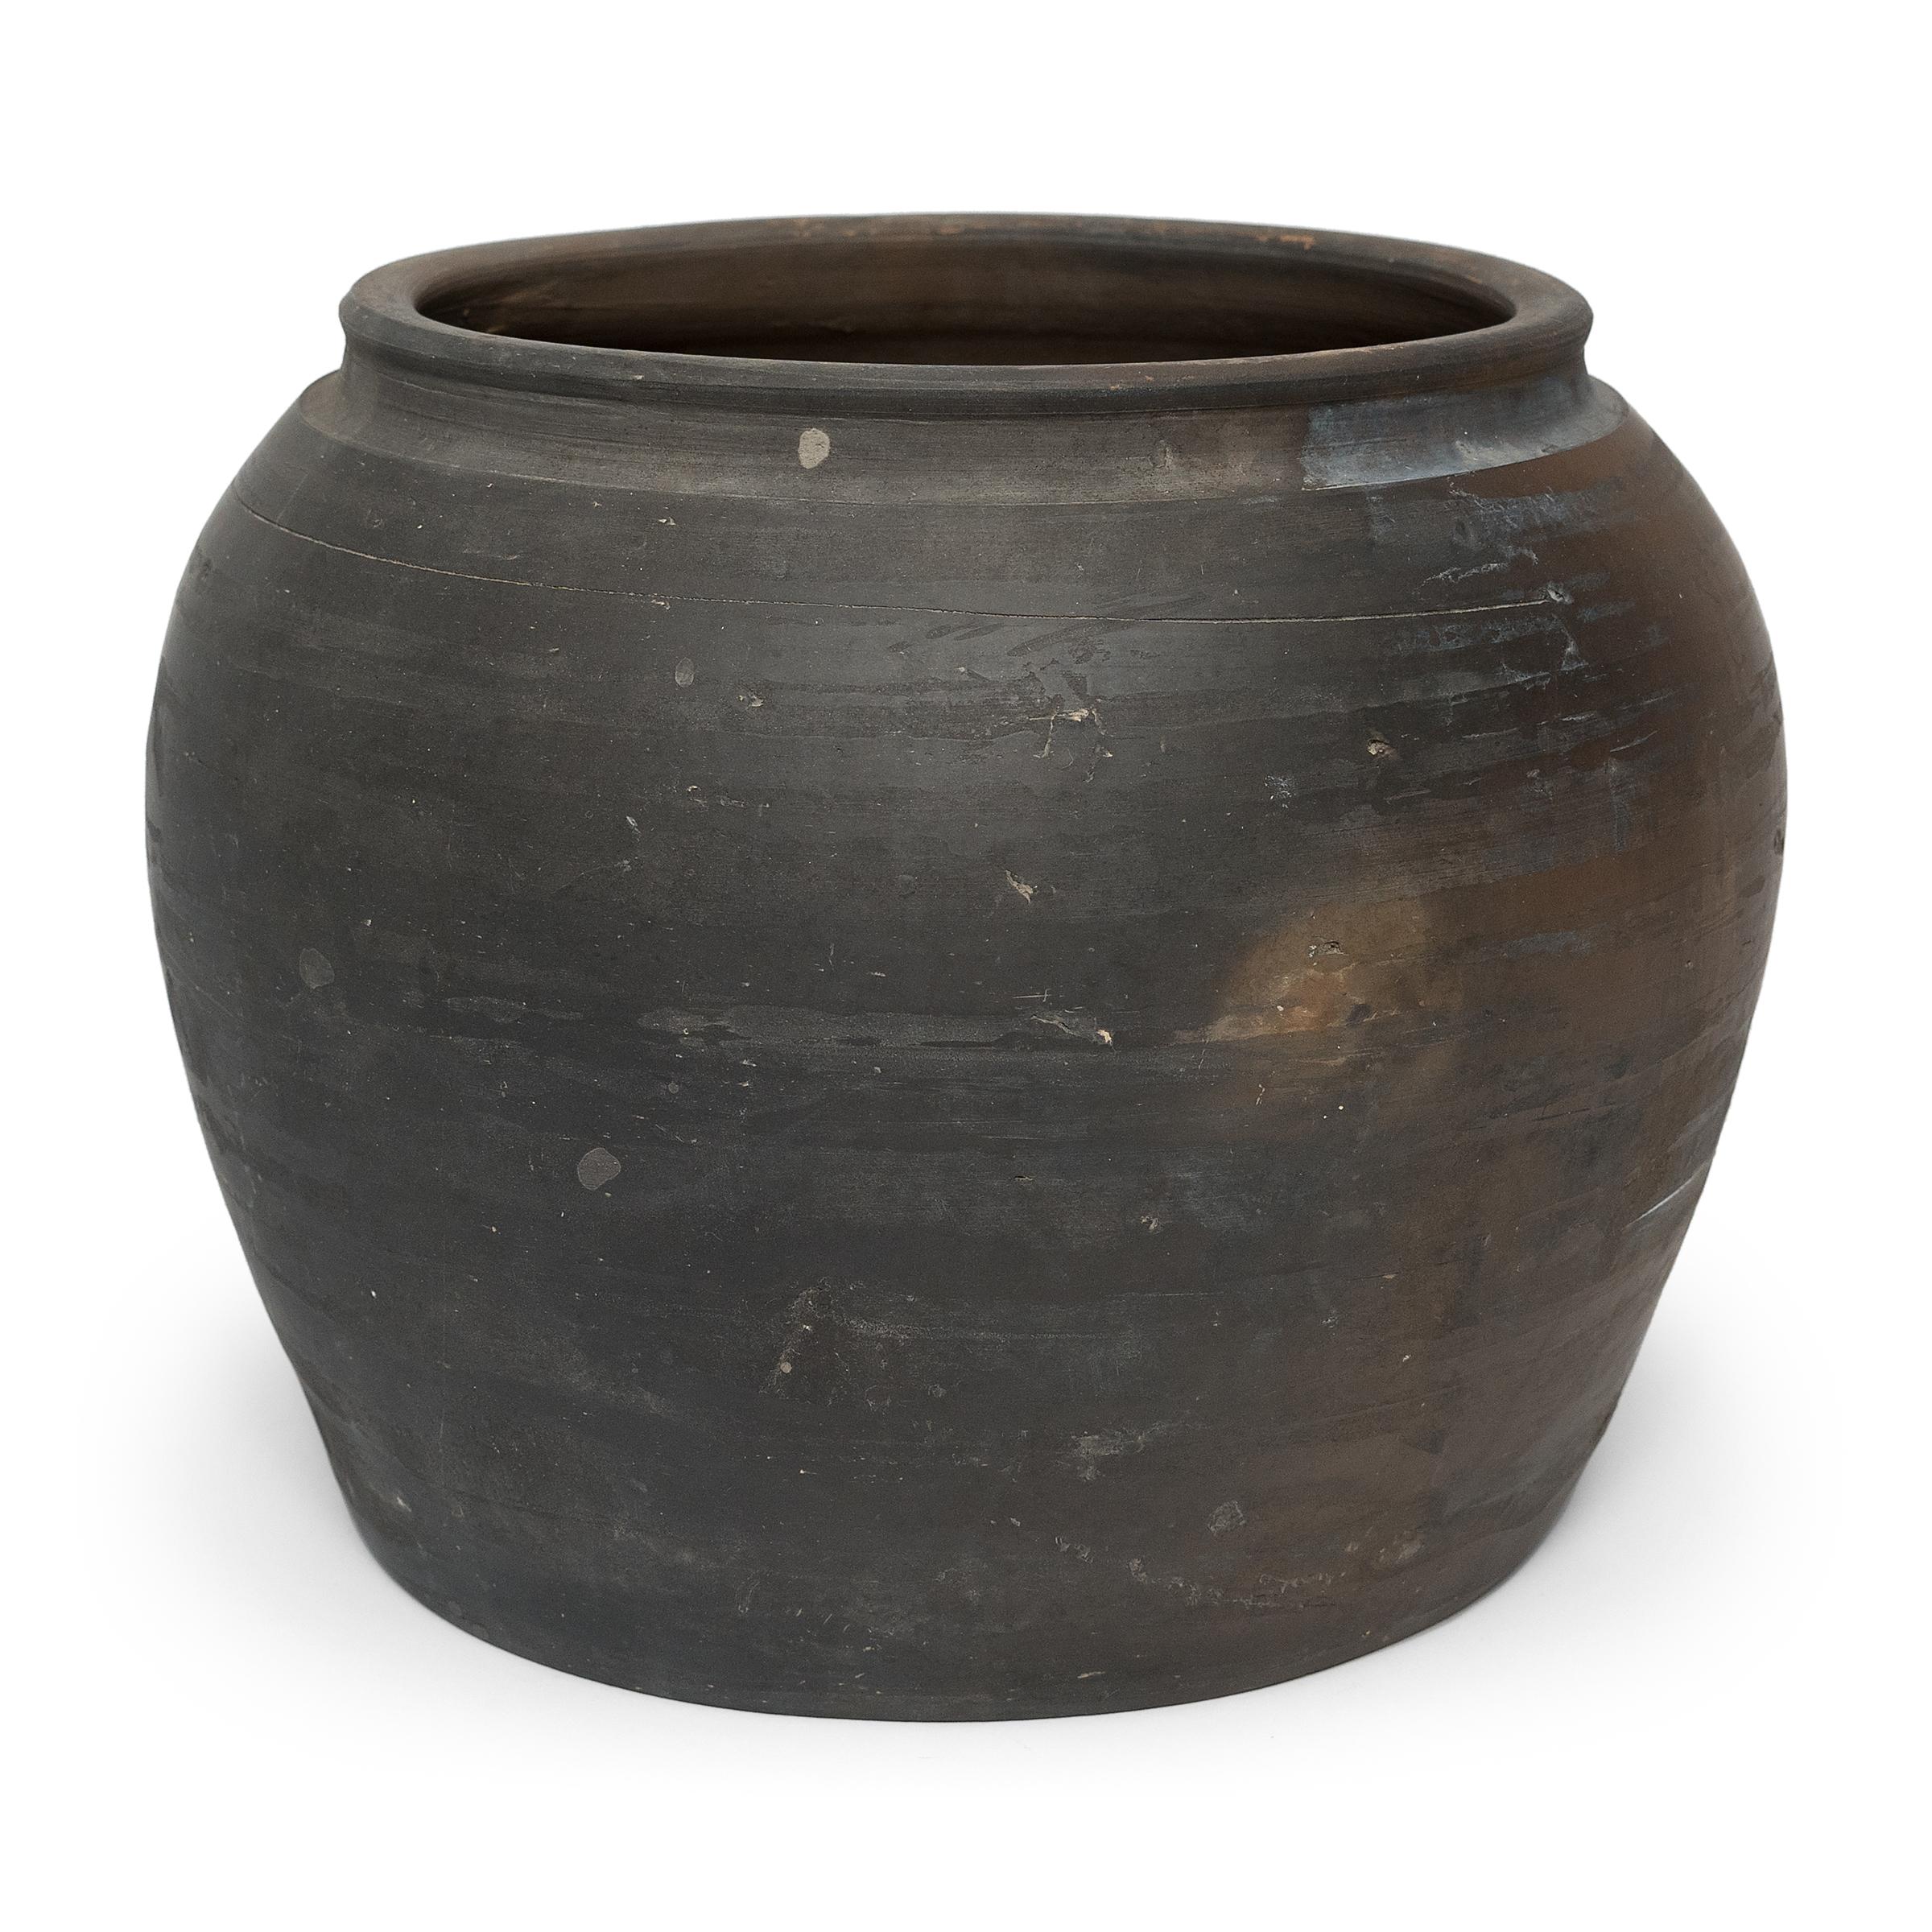 Sculpted during the early 20th century in China's Shanxi province, this vessel has a smoky black exterior on one side that transitions into a golden brown on the other. With balanced proportions and a beautifully irregular unglazed surface, this